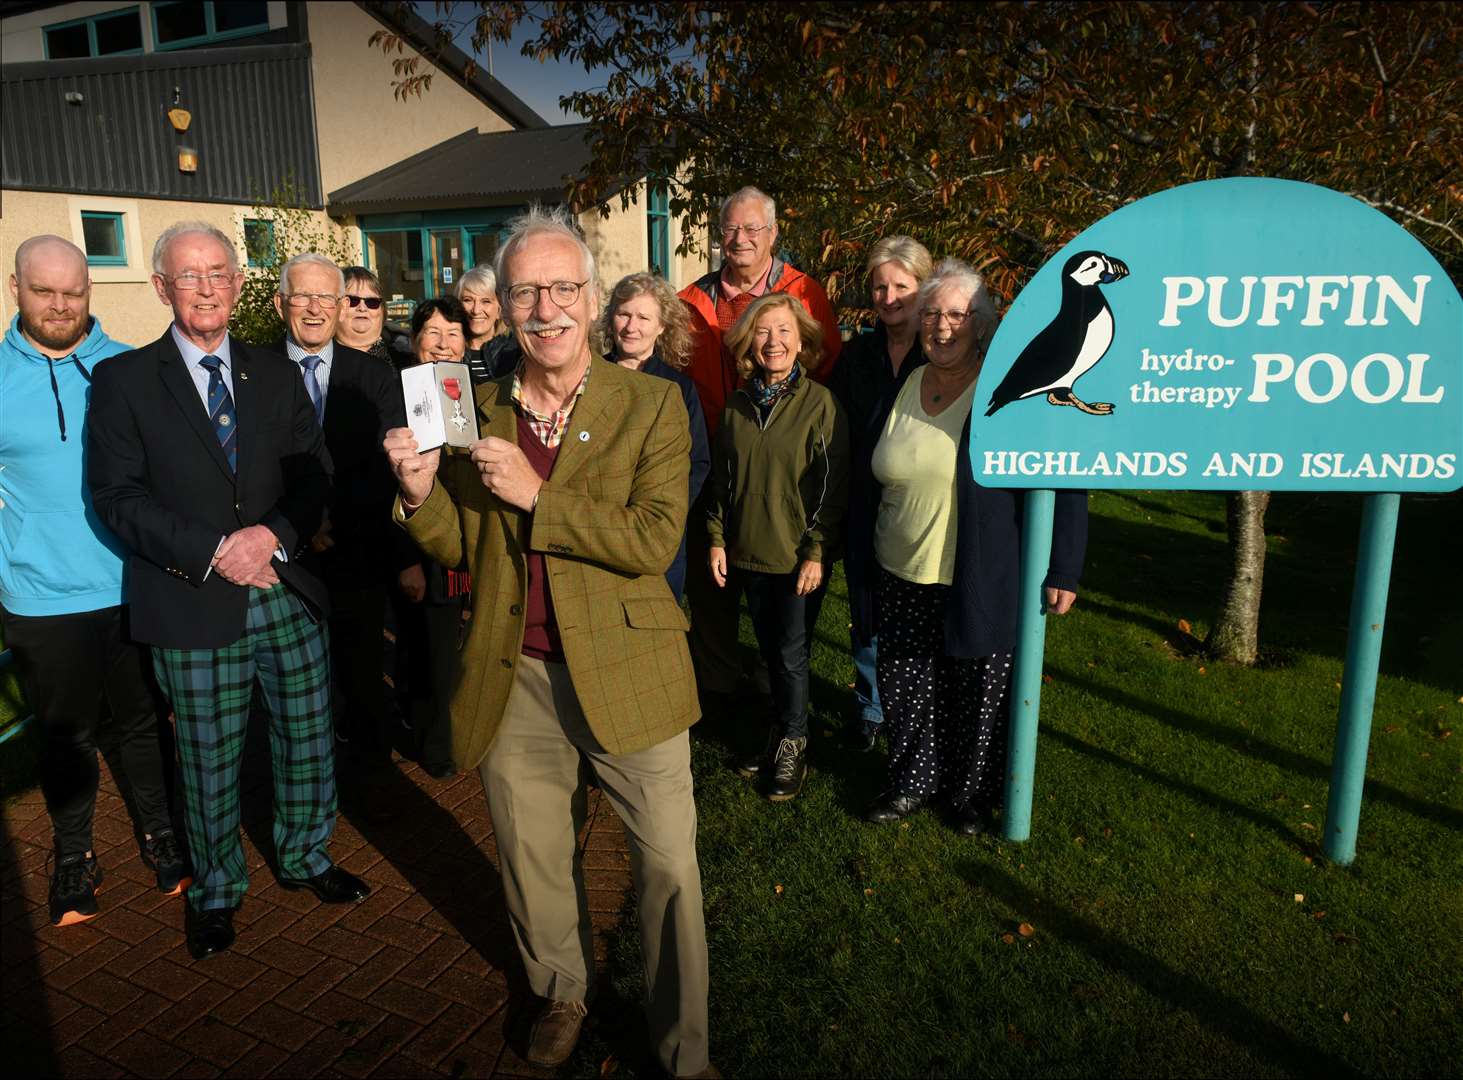 MBE recipient Dr Malcolm Monteith with others who support the Puffin Pool hydrotherapy facility in Dingwall. Picture: James Mackenzie